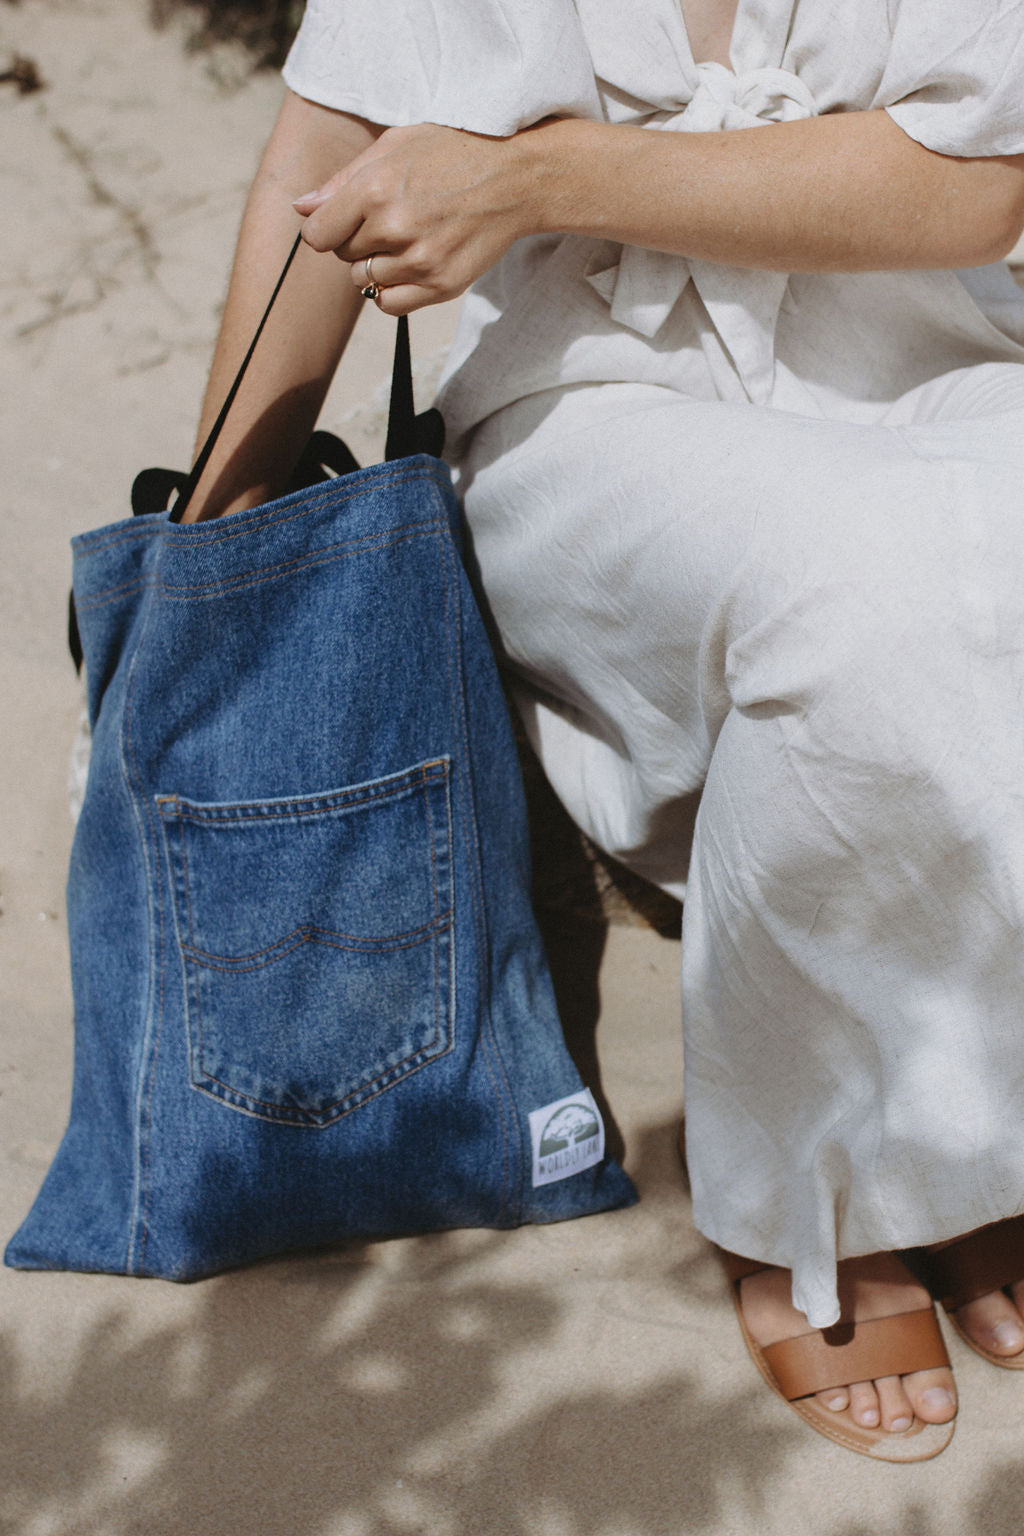 Introducing our upcycled denim tote bag